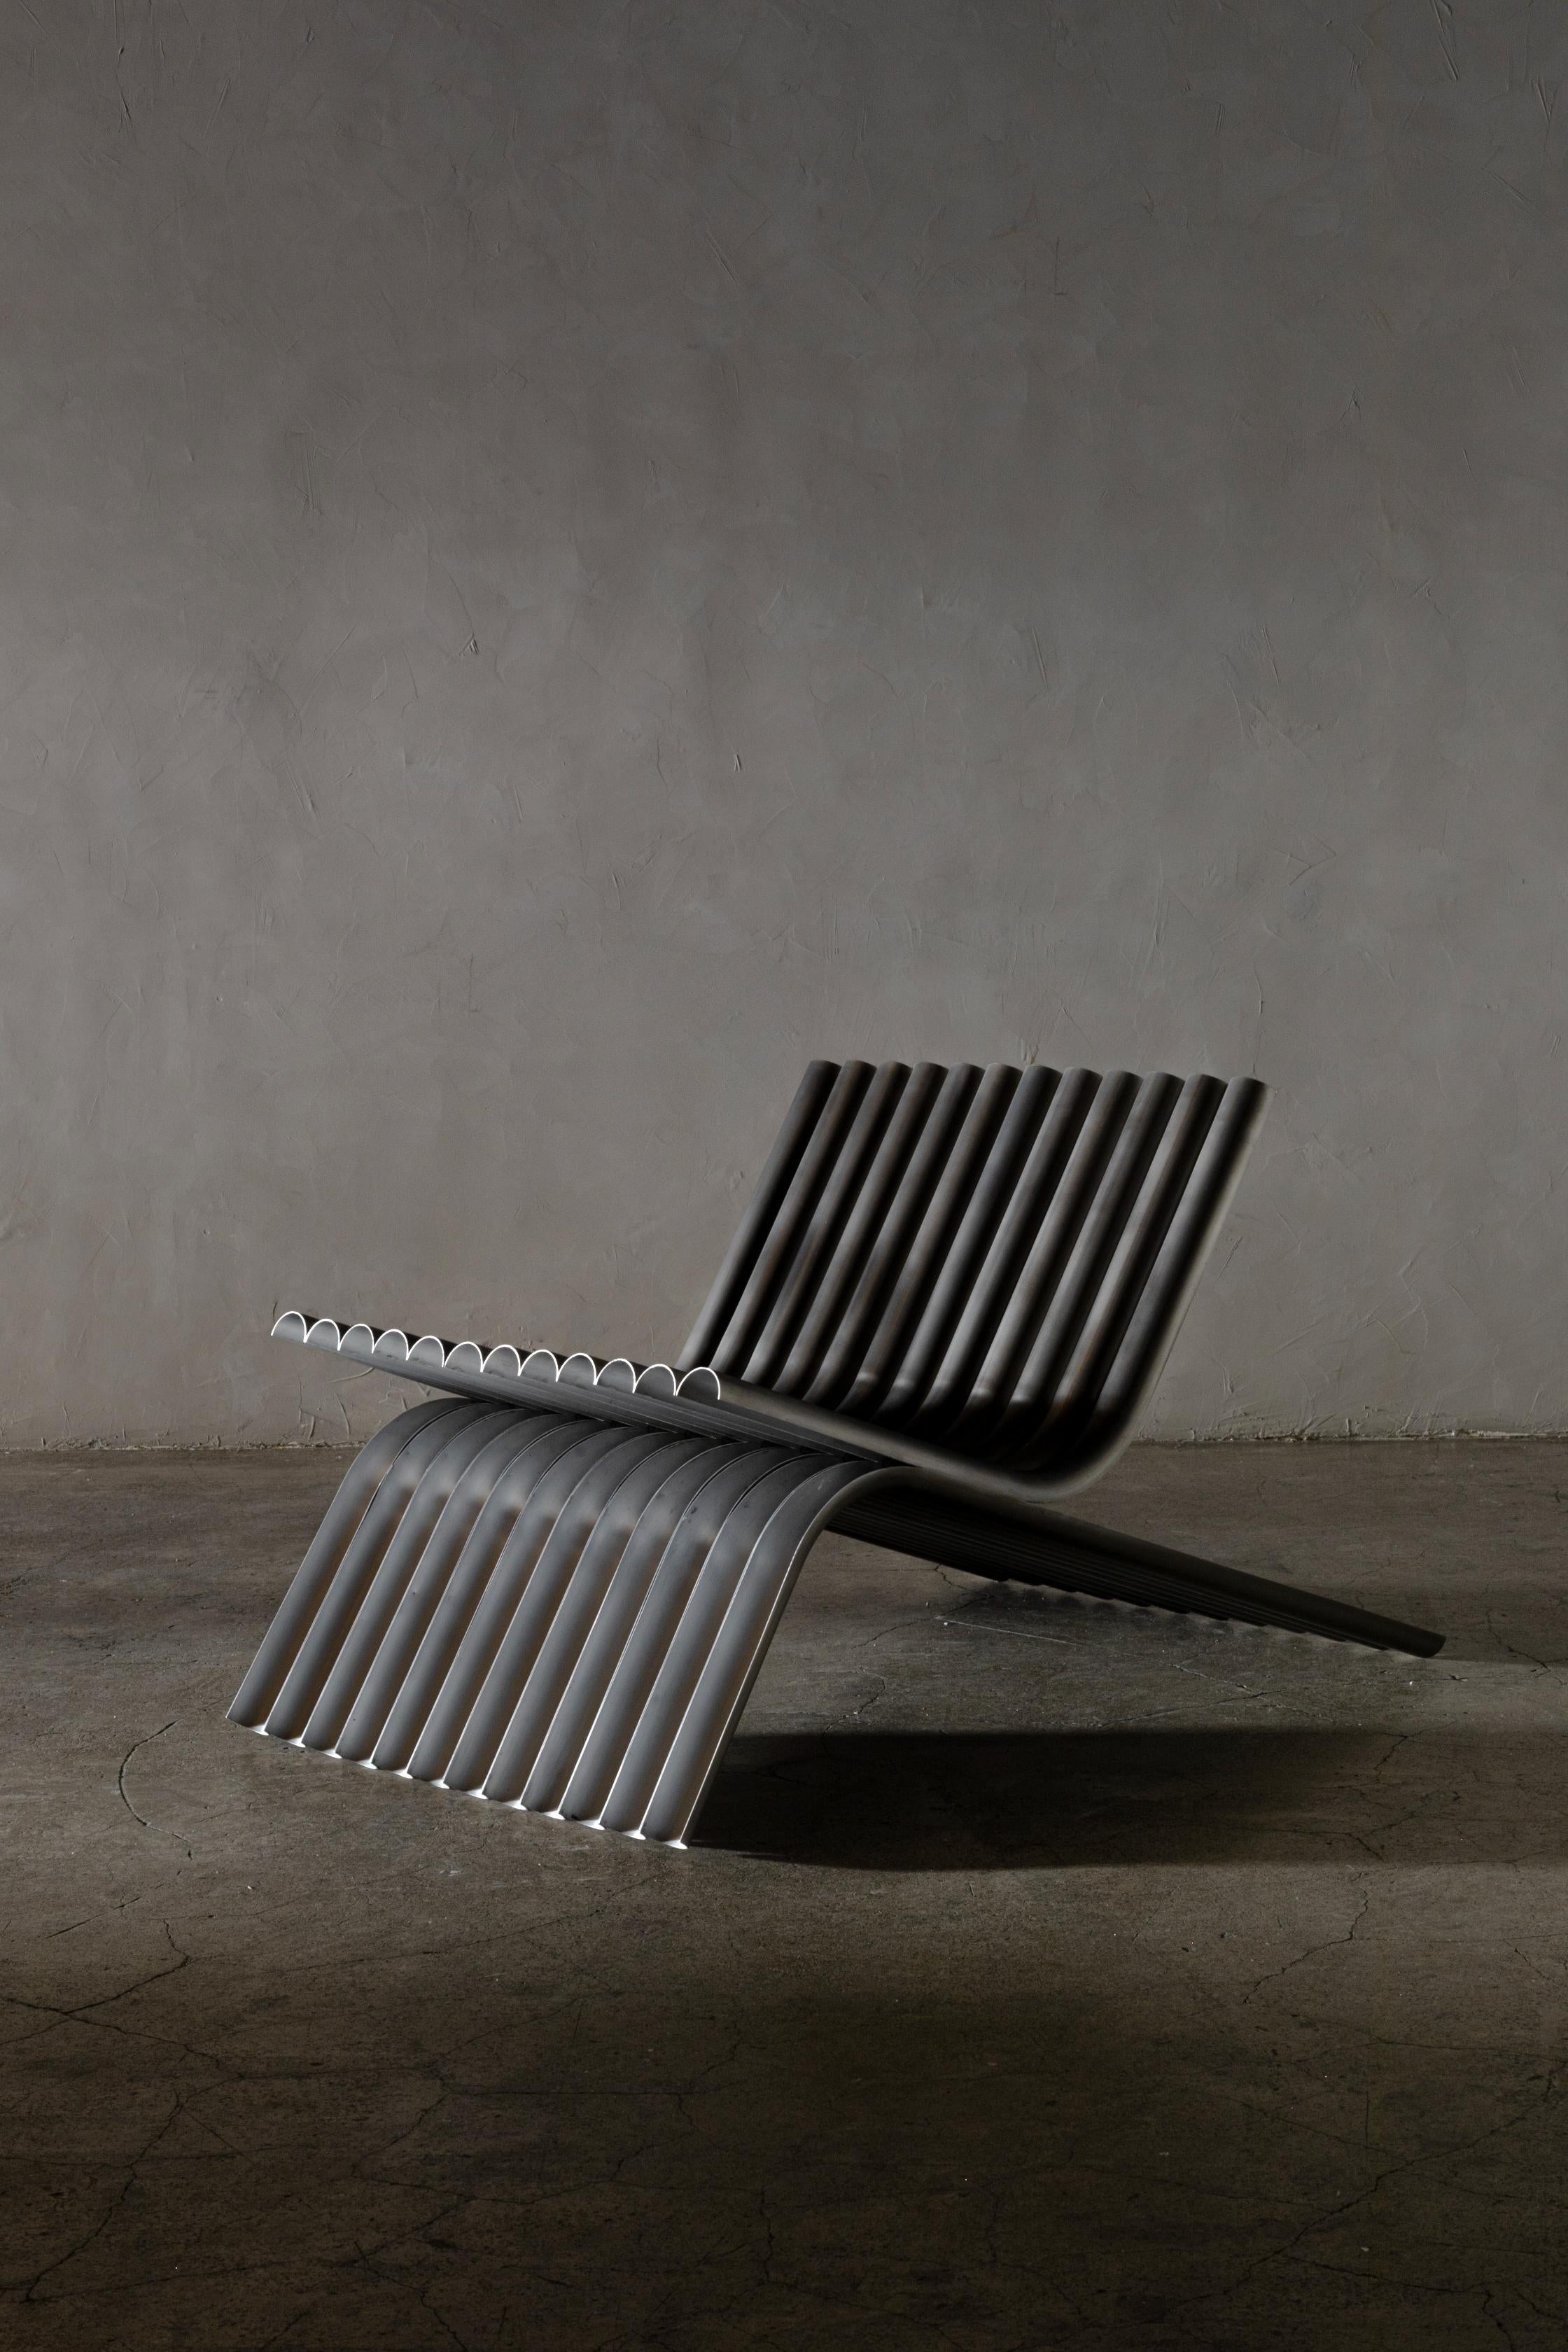 OBJ-02 steel lounge chair by Manu Bano.
Dimensions: 100 L X 60 W X 60 H cm.
Material: Steel.

OBJ-02 is a low chair composed of a repetition of brass tubes. Each one is cut in half and bent independently, creating the back, seat and legs.

The